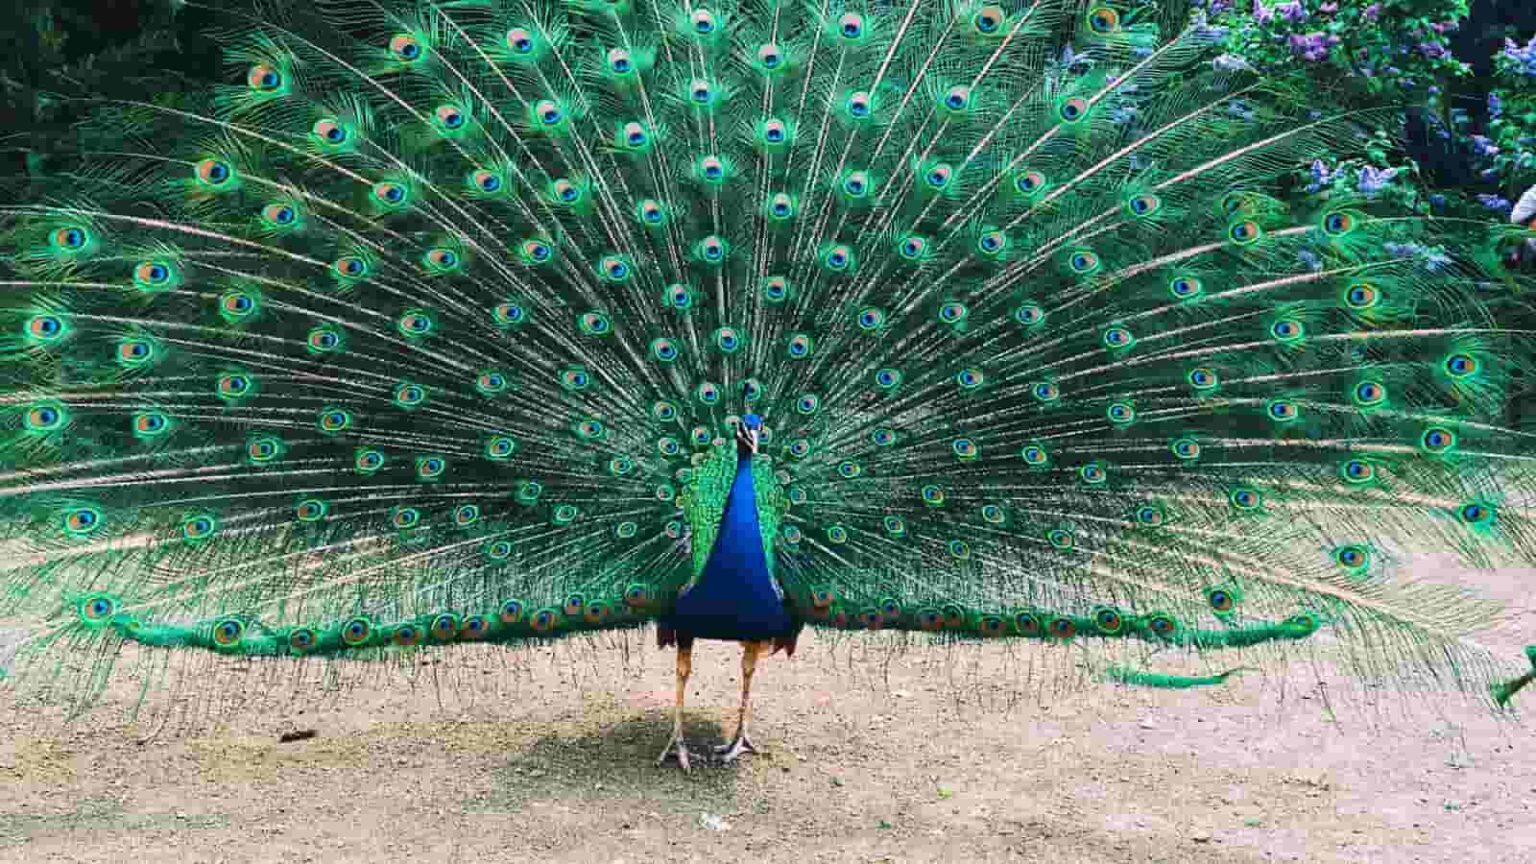 Essay on Peacock in English 750+ Words Essay (Top 3)